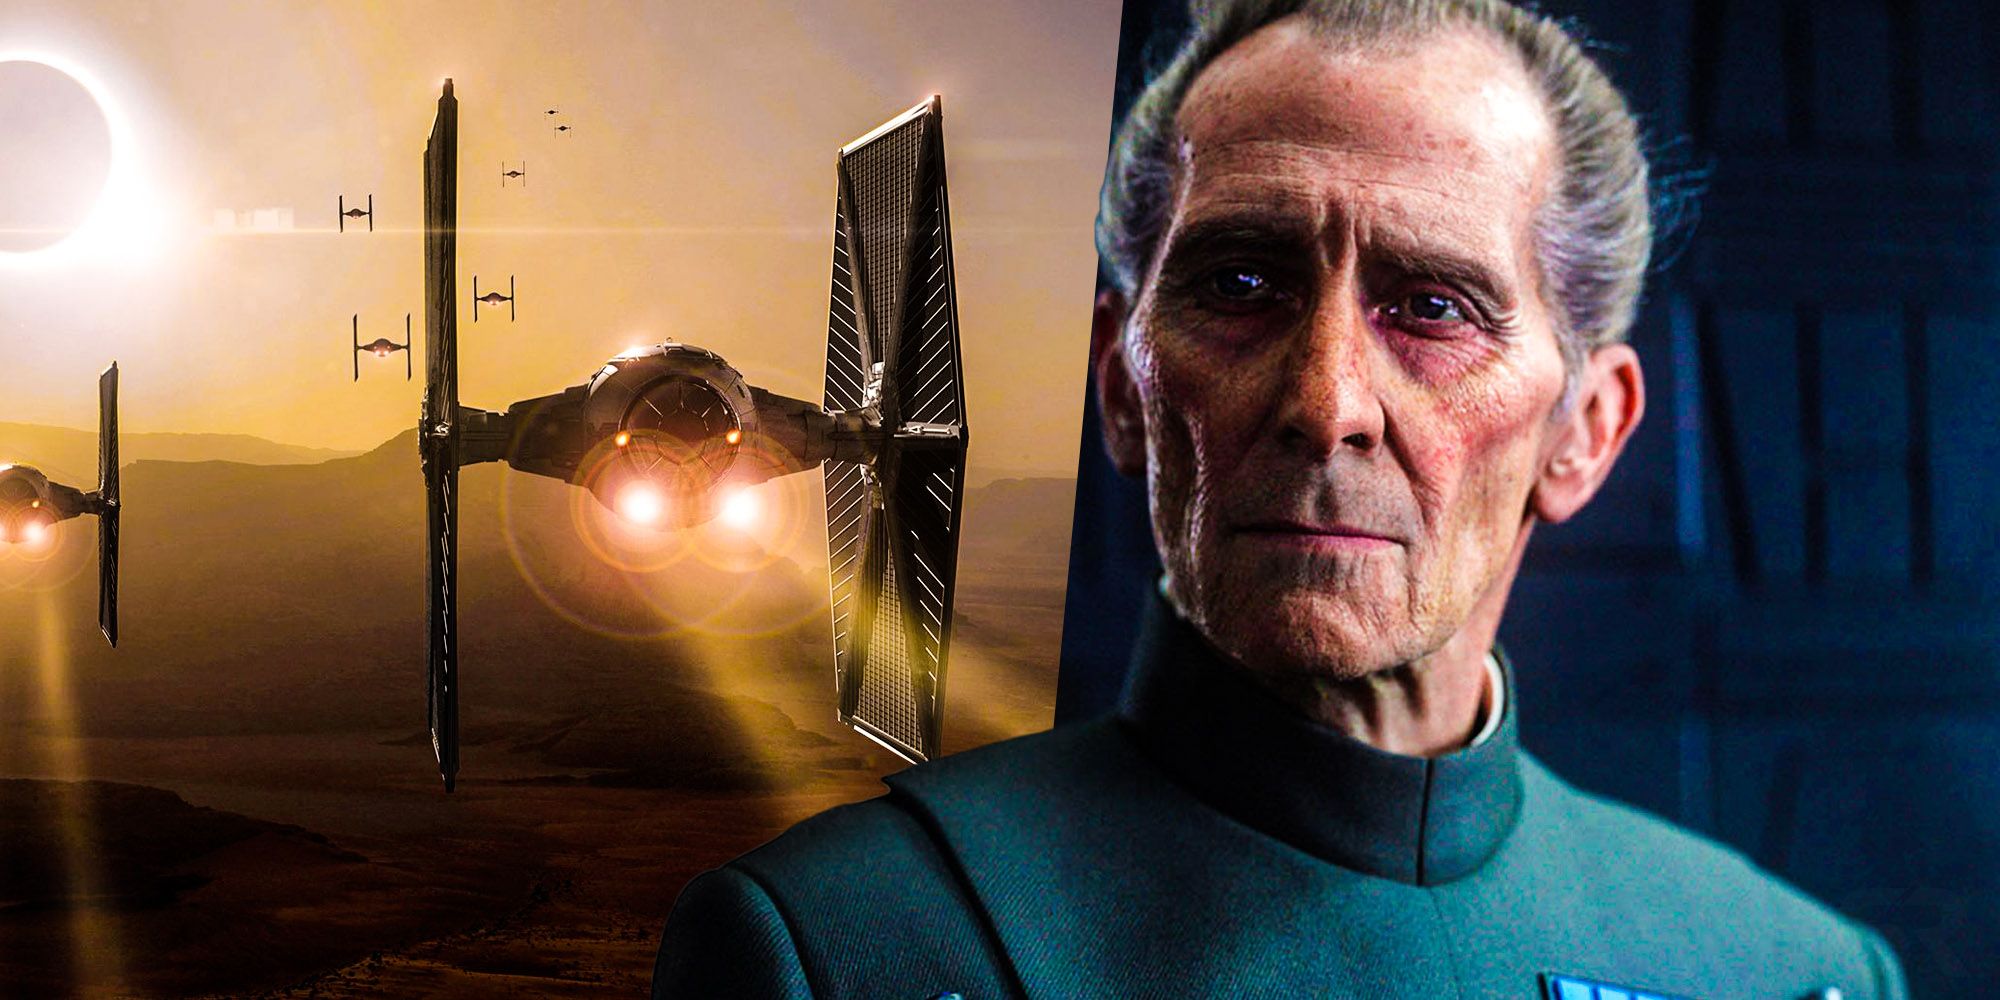 Admiral Tarkin and the Star Wars: The Force Awakens squadron